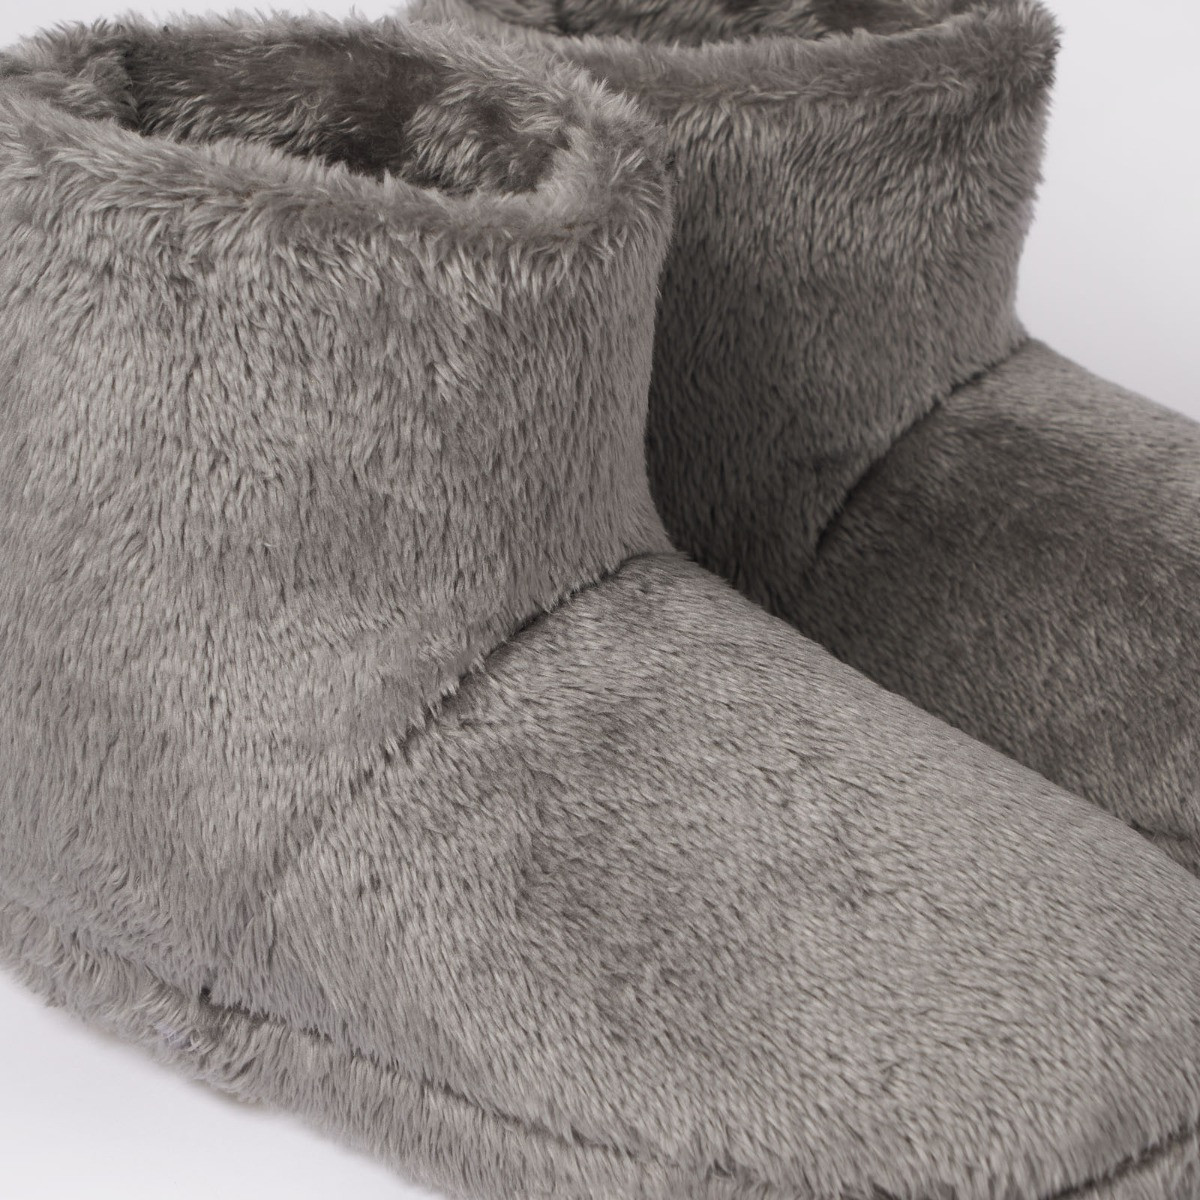 OHS Teddy Boot Slippers, Grey - Large>